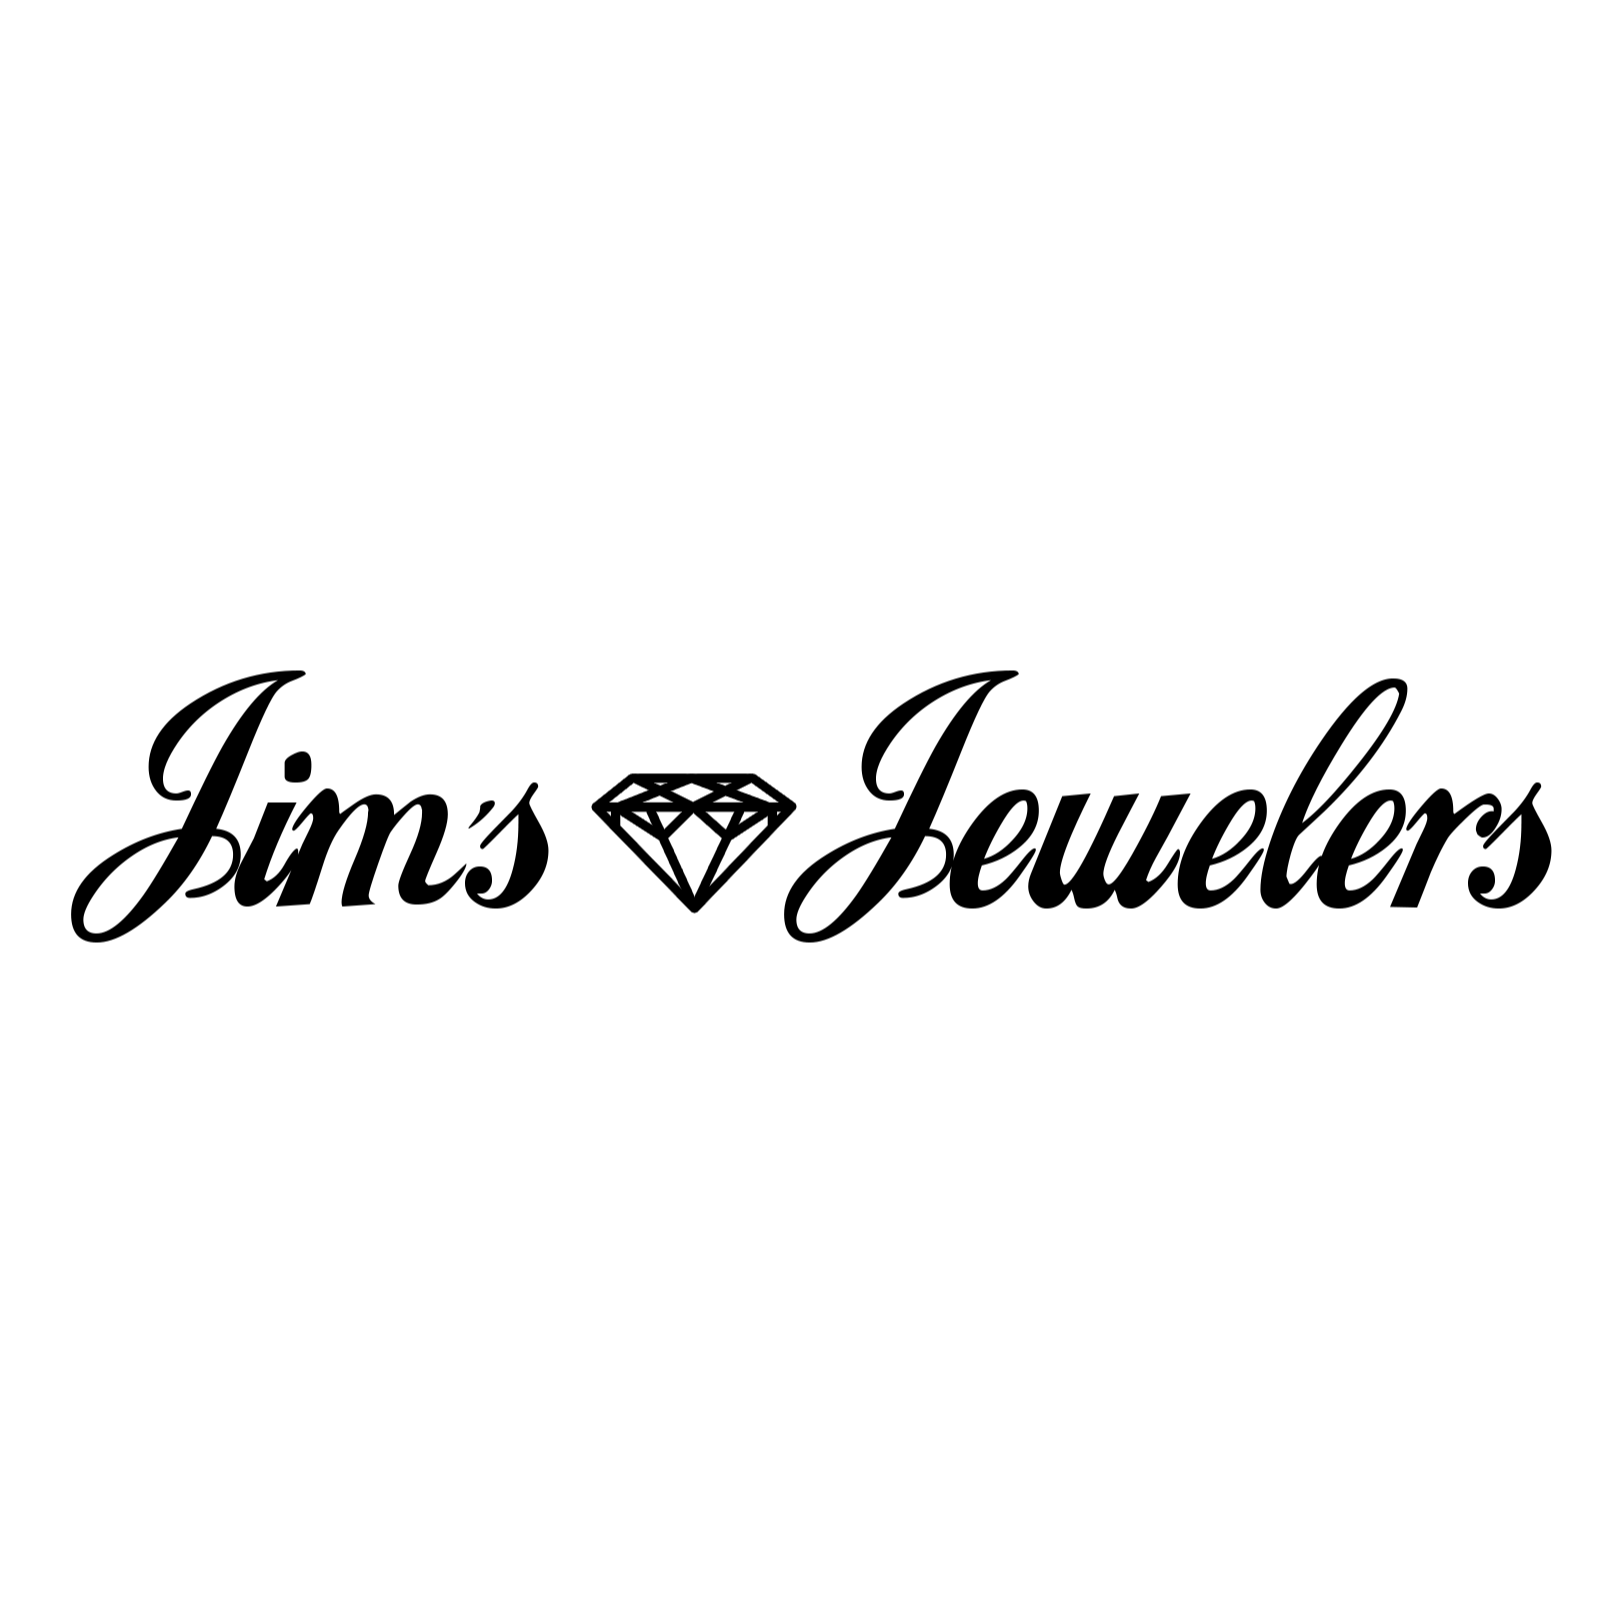 Jim’s Jewelers - Tyler, TX 75701 - (903)593-8962 | ShowMeLocal.com